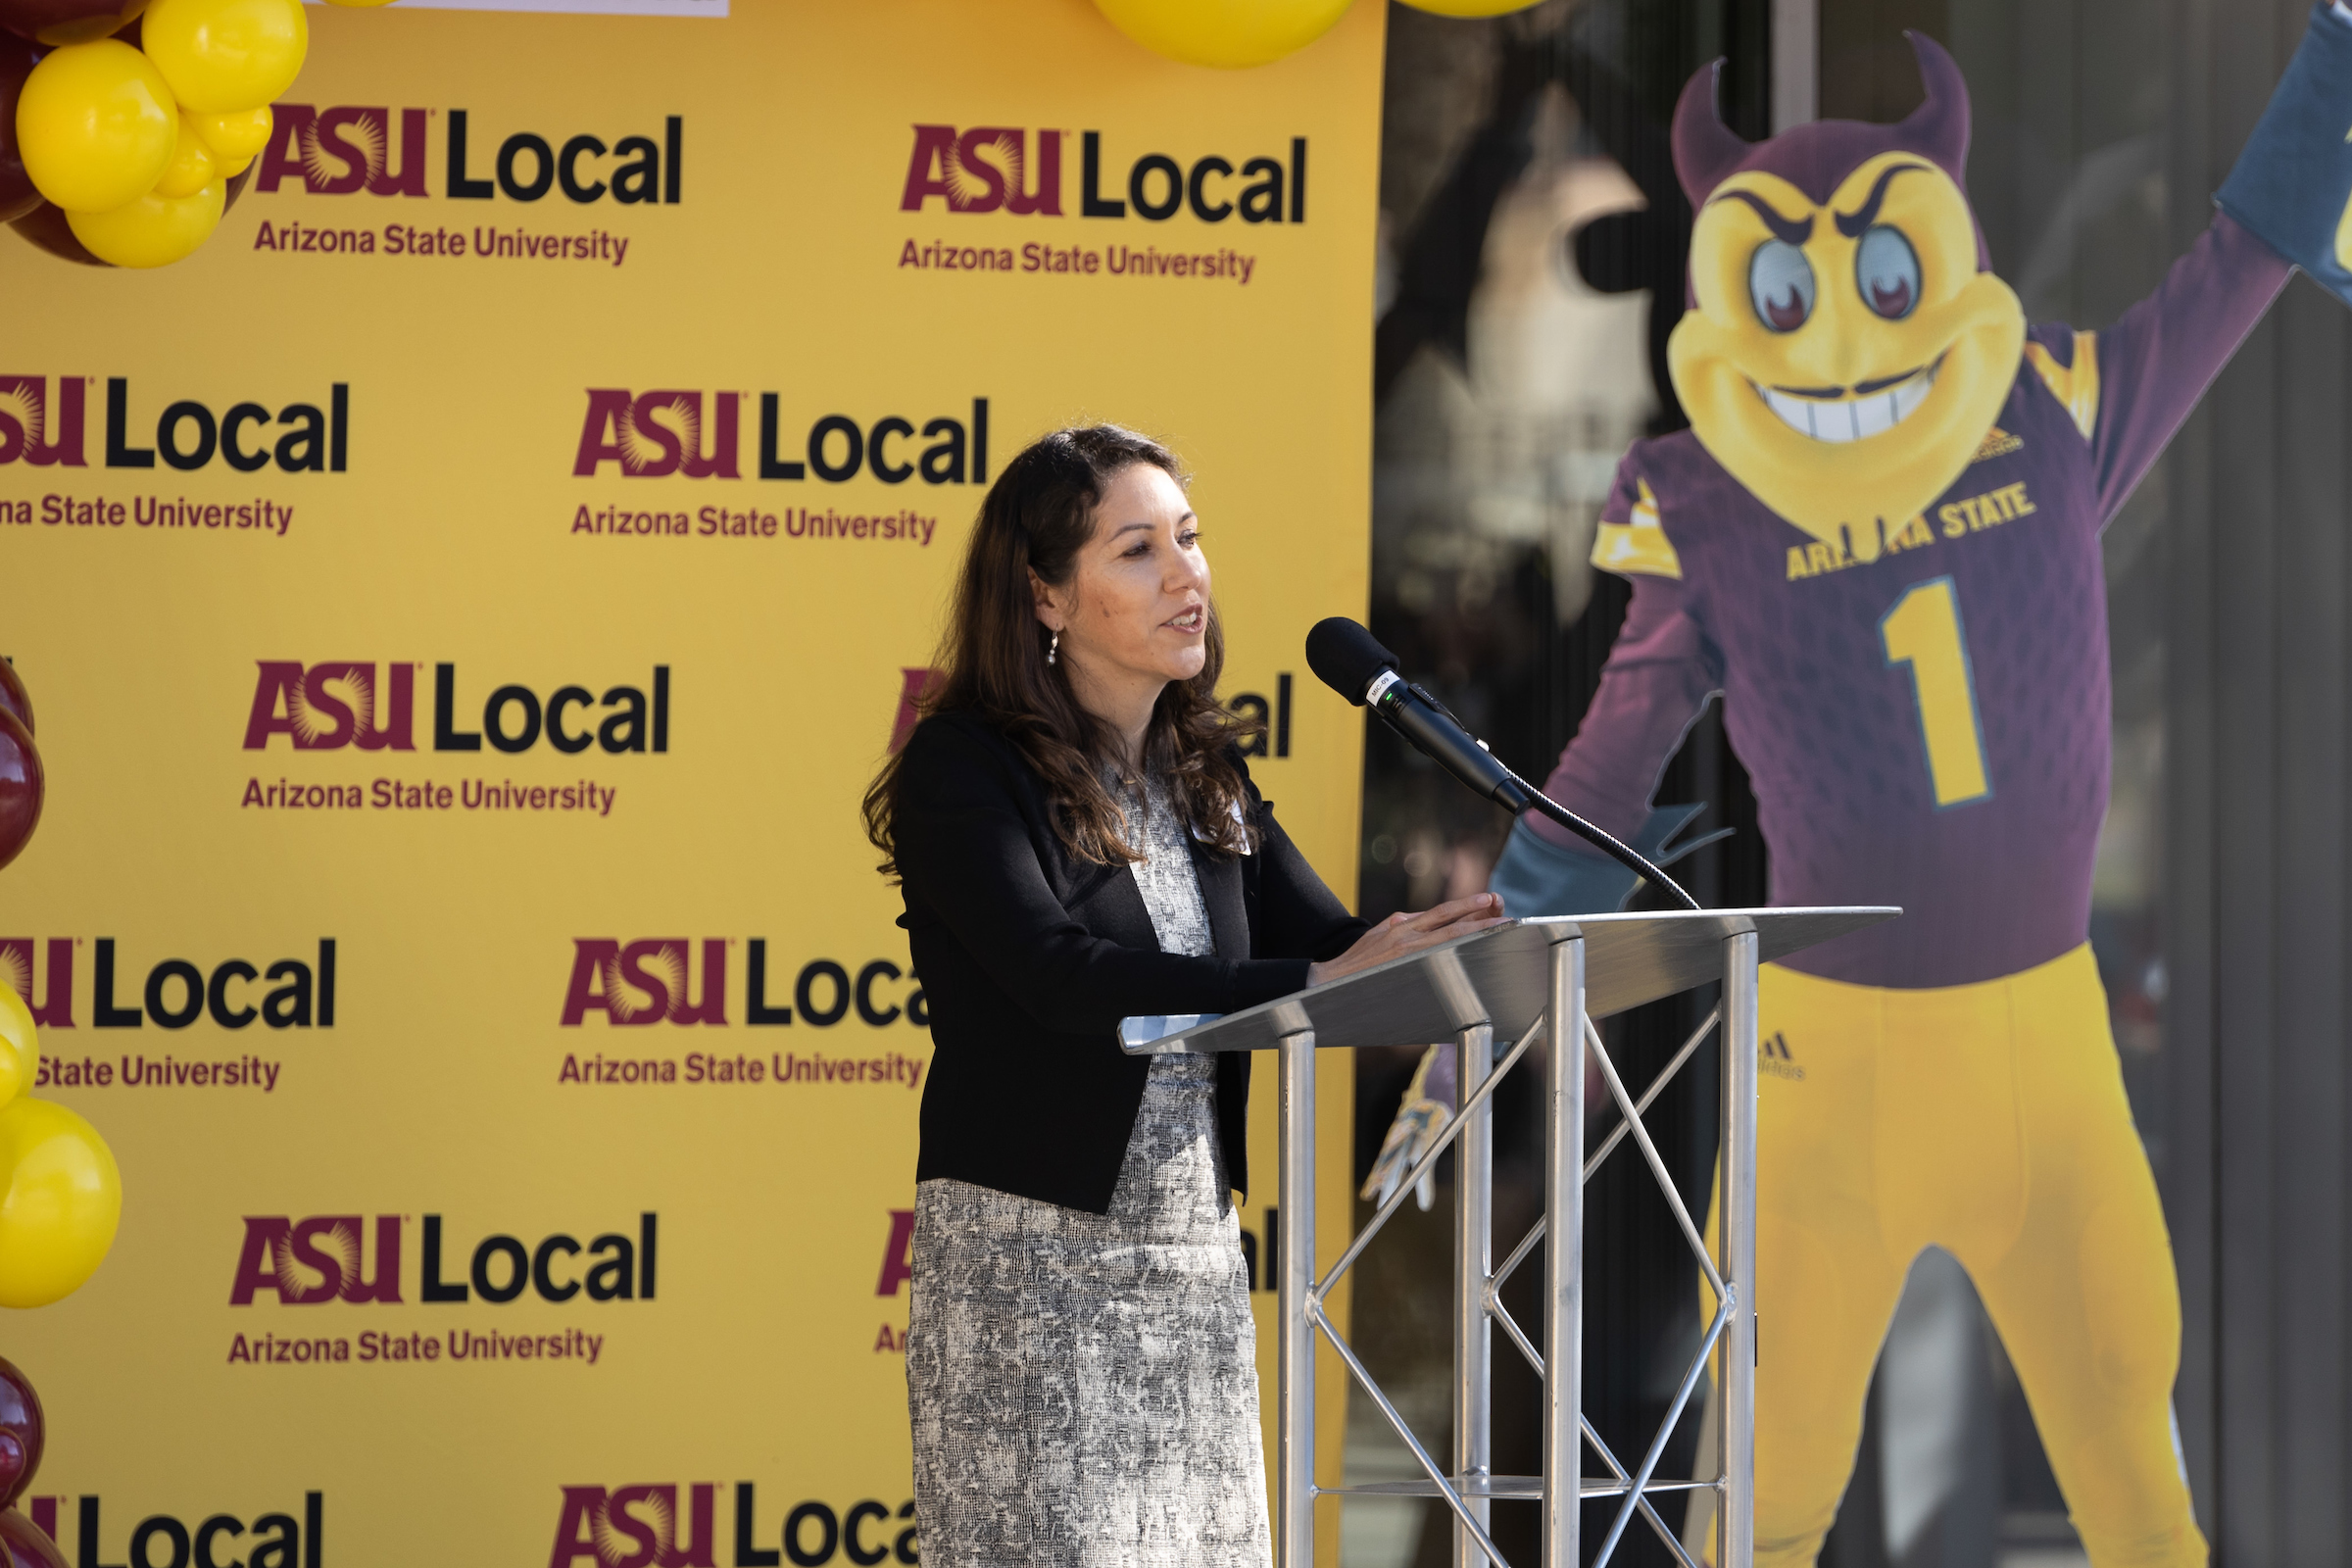 woman speaking at lectern at ASU Local event with cardboard cutout of Sparky mascot in background